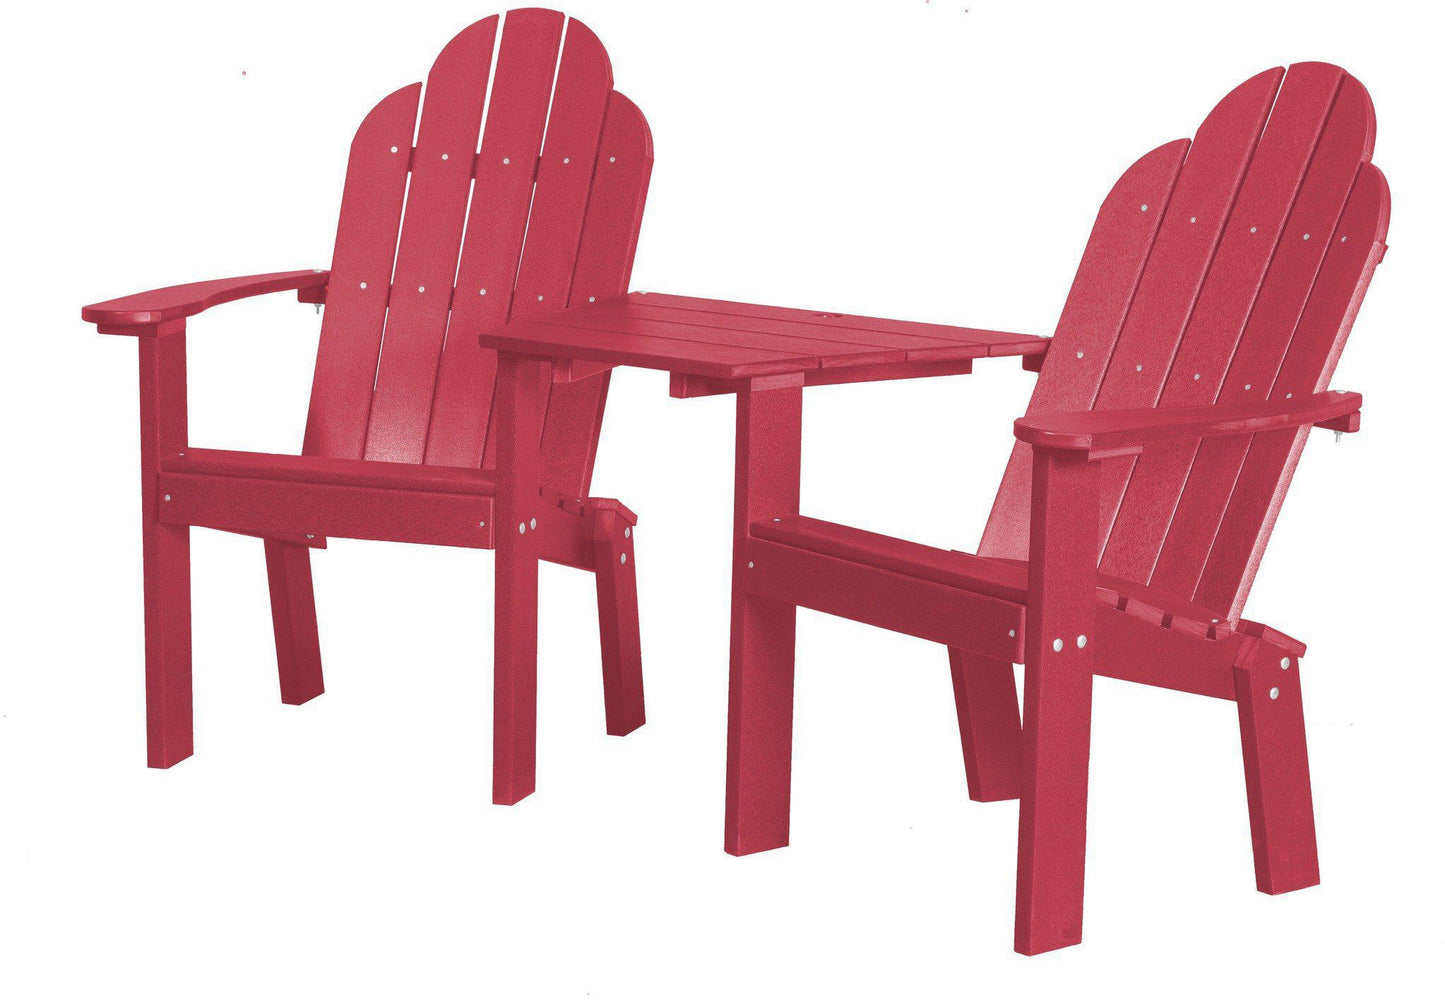 Wildridge Outdoor Recycled Plastic Classic Deck Chair Tete a Tete - LEAD TIME TO SHIP 3 WEEKS